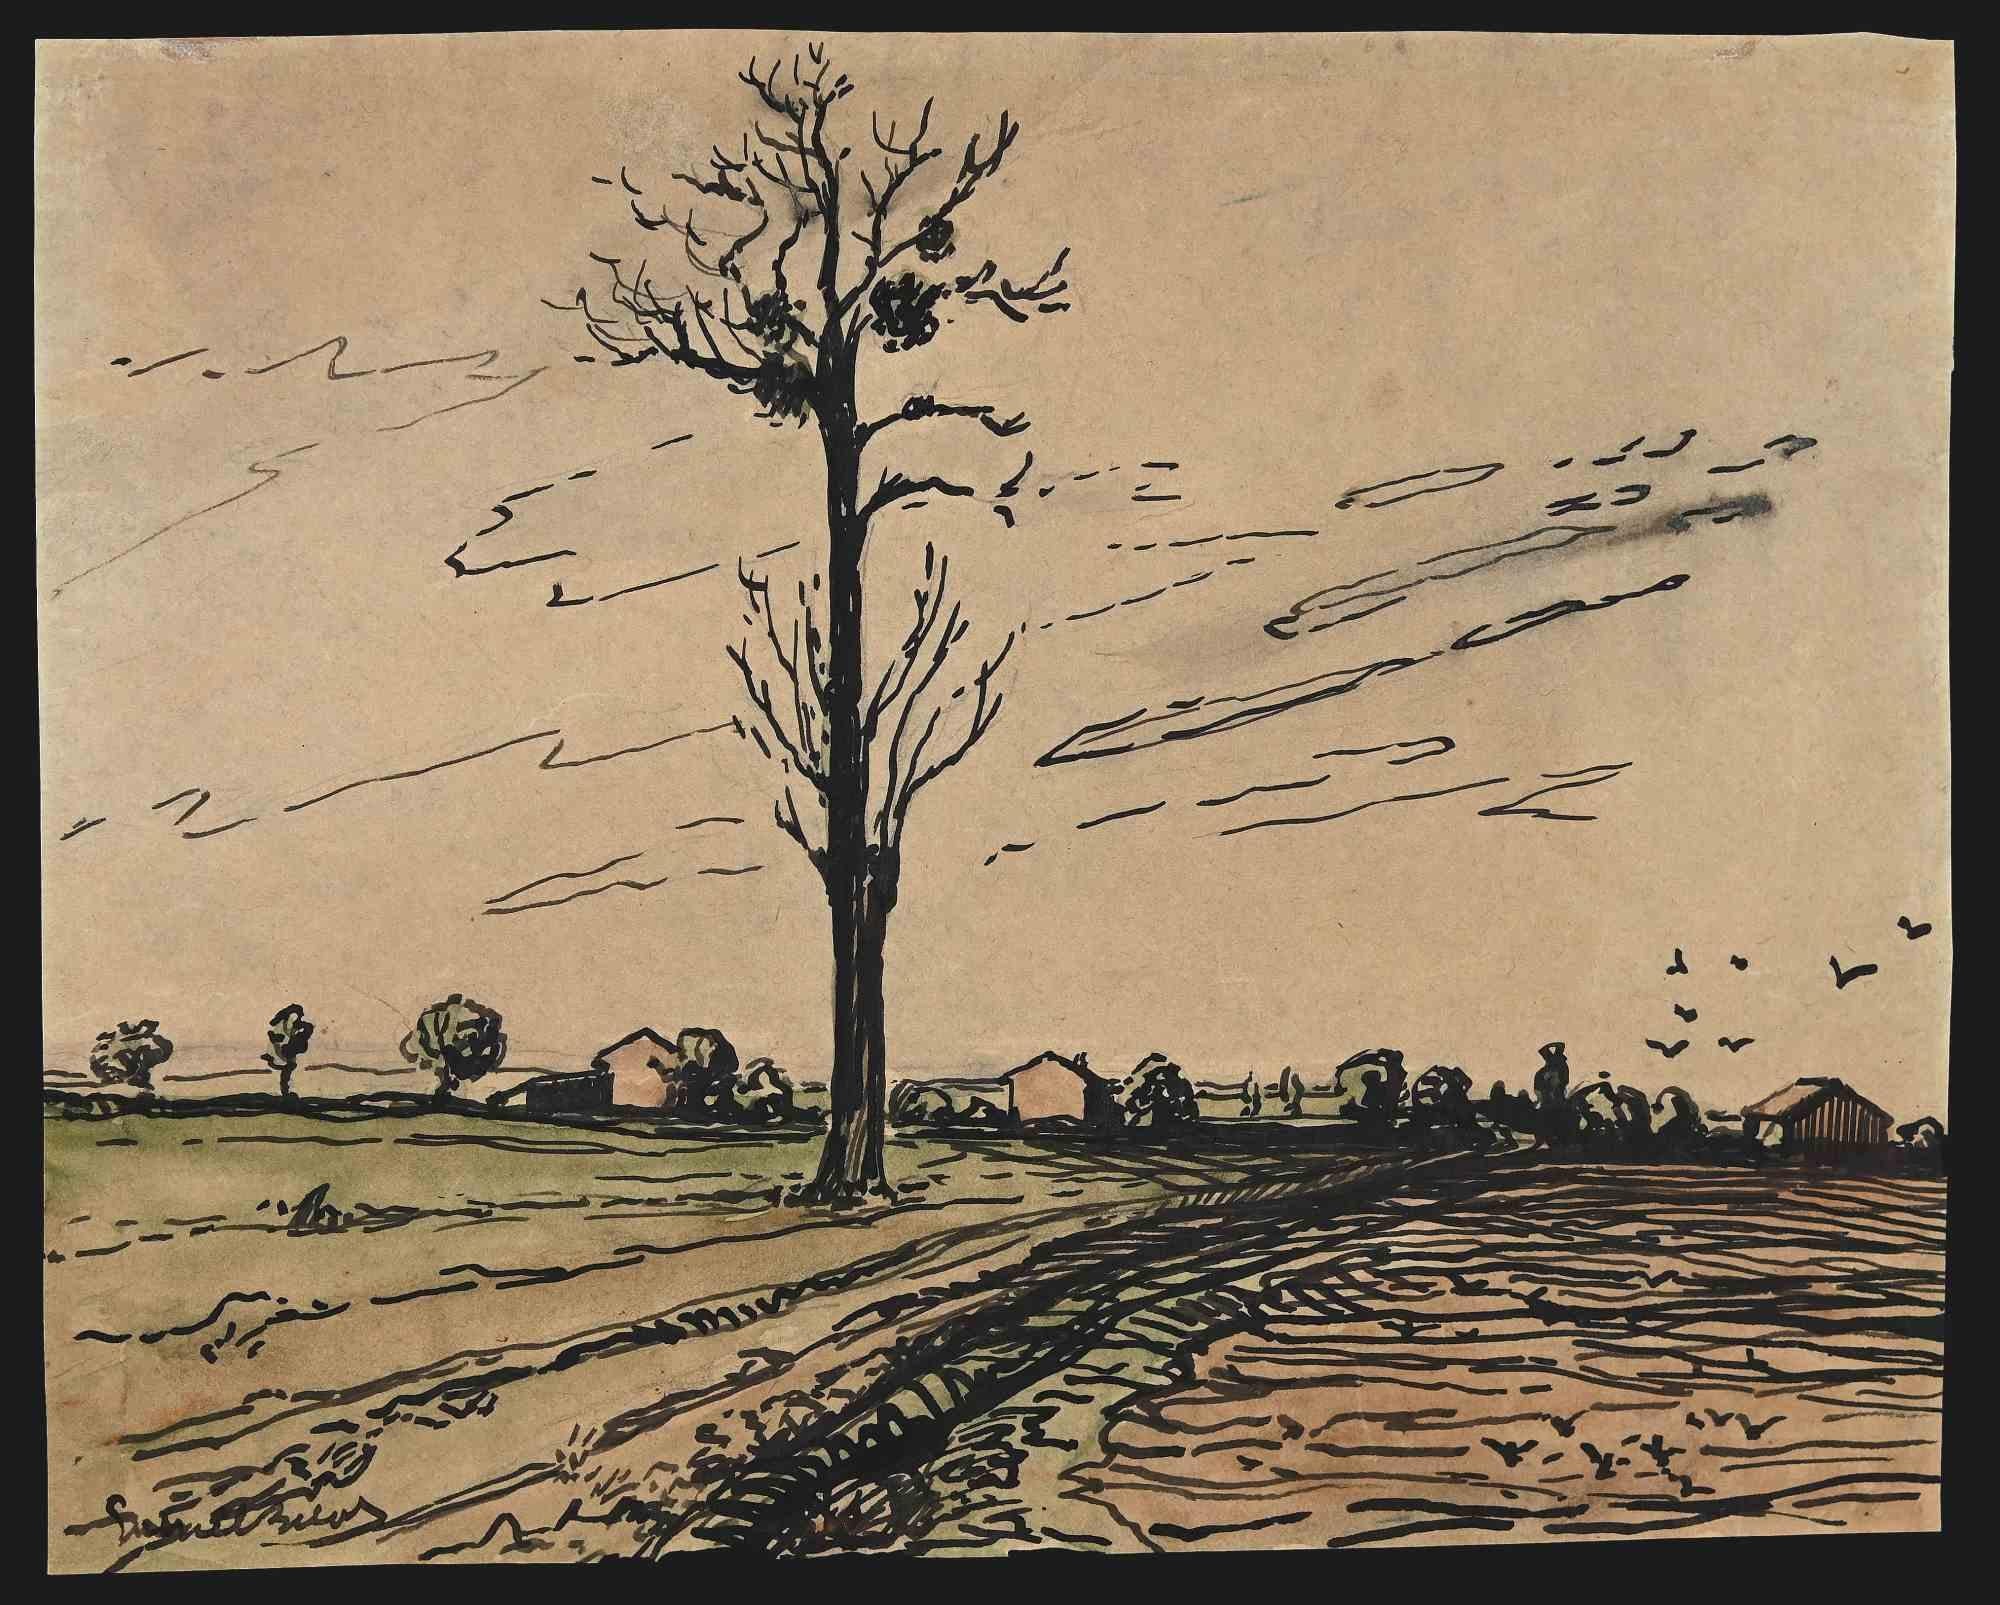 French Countryside - Original China Ink Drawing and Watercolor - 1940s